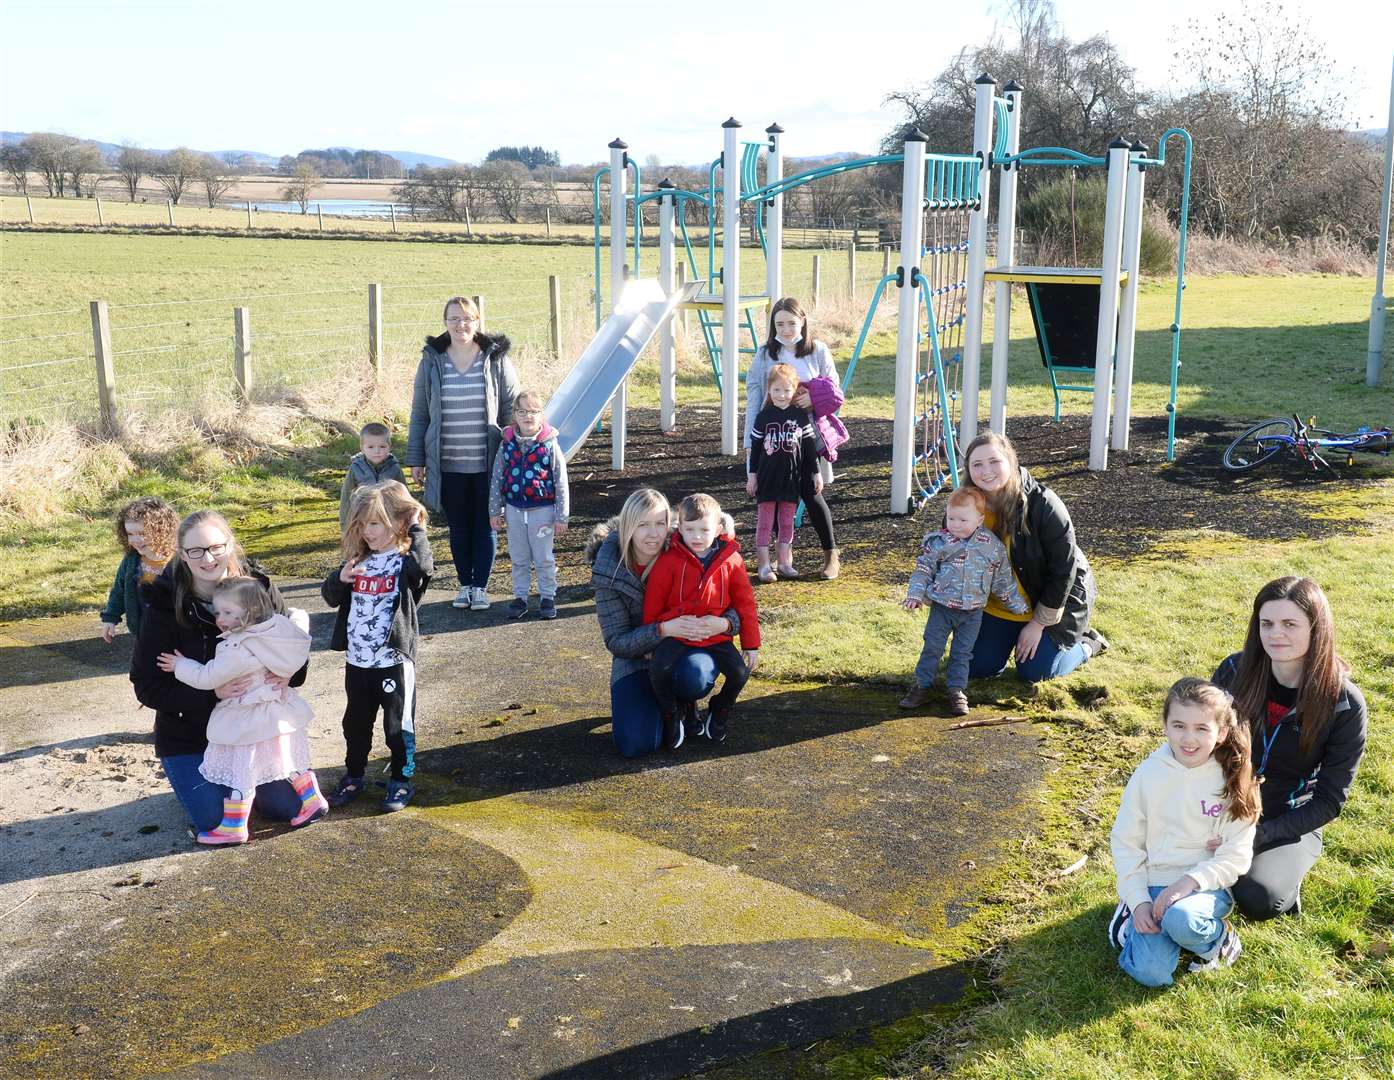 Children and parents at Orchard Park in Beauly where play equipment has been removed.